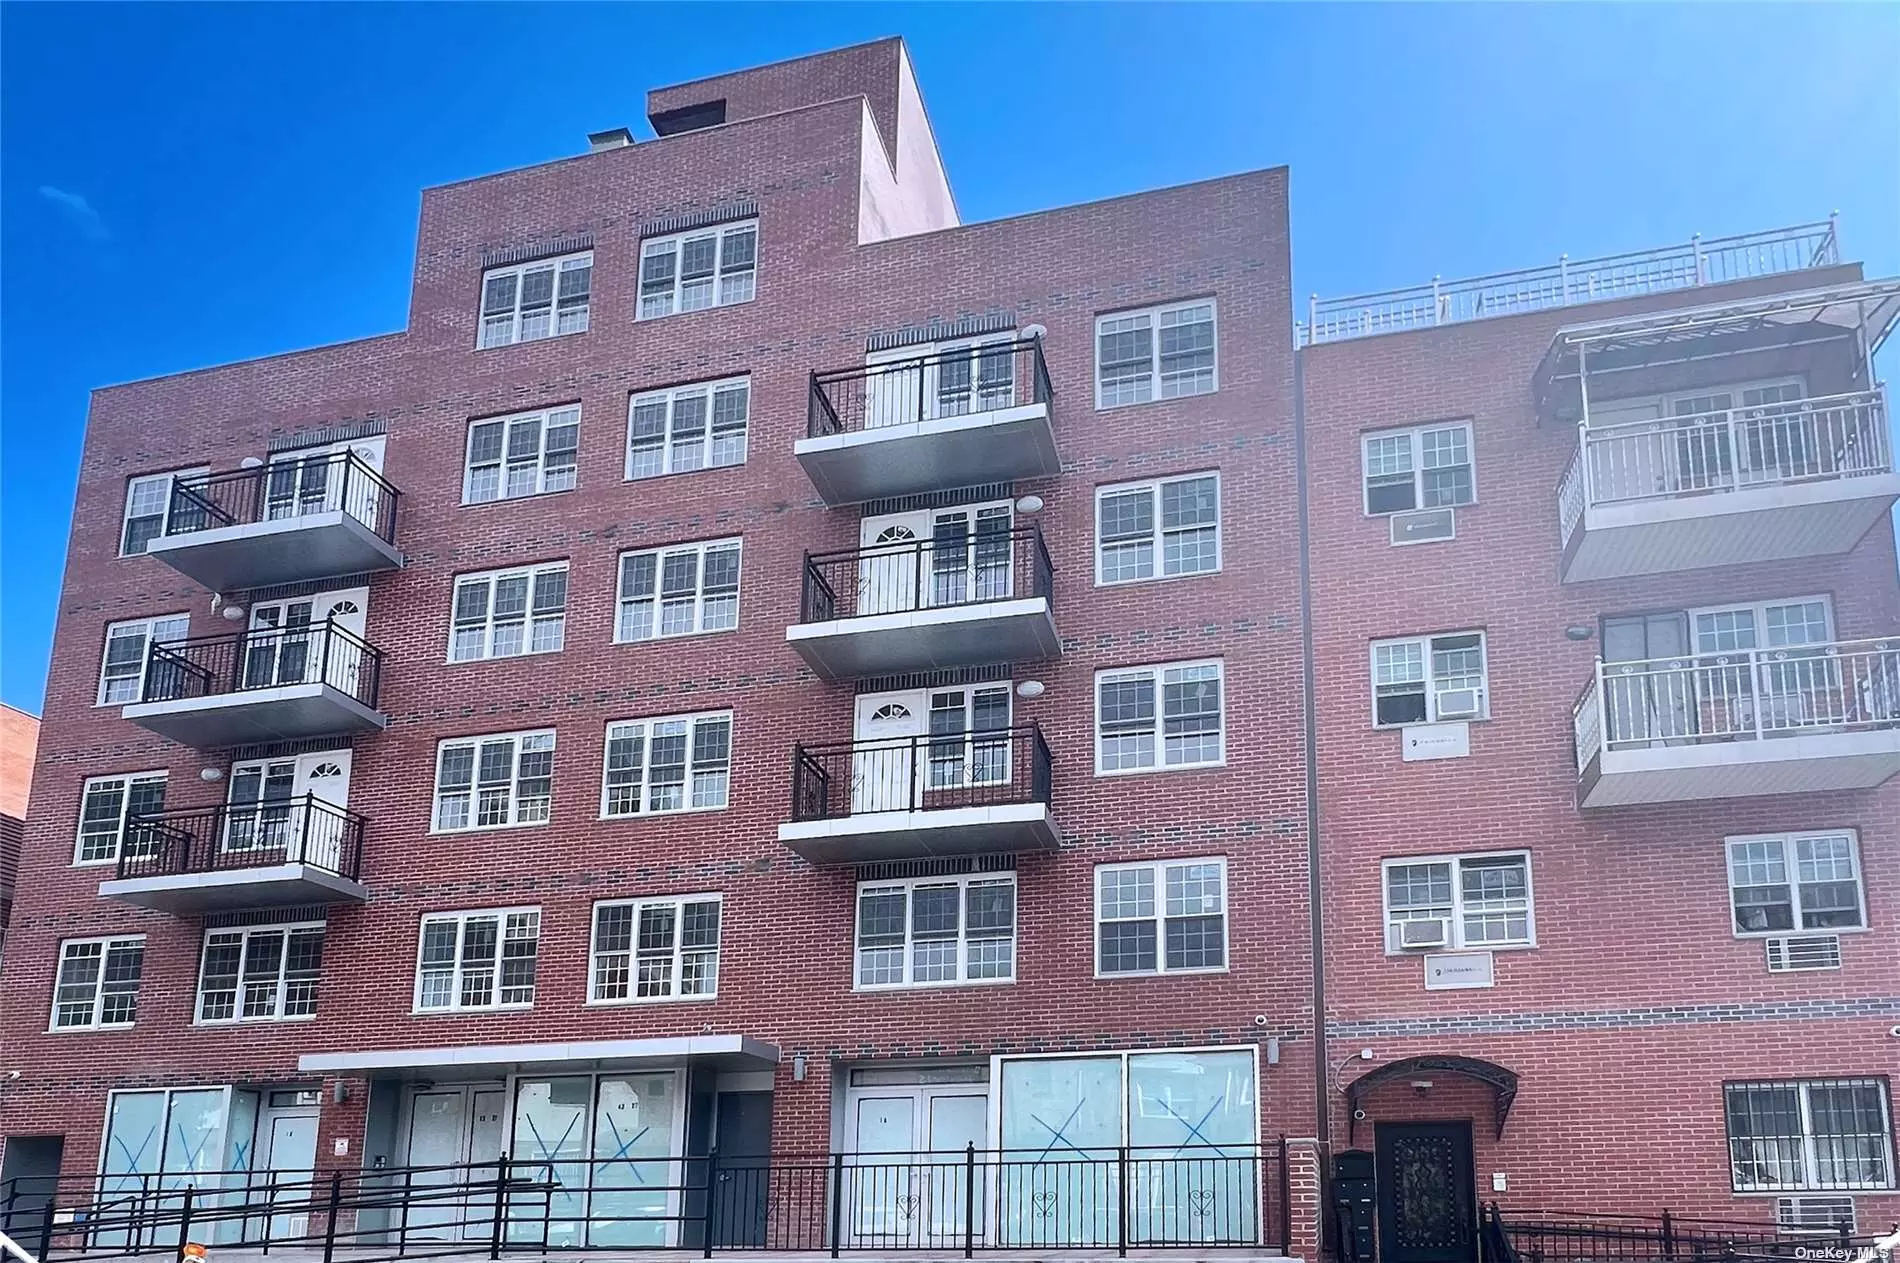 Location, Location, Location, Downtown Flushing, close to all, 10 mins walk to Main St #7 train.